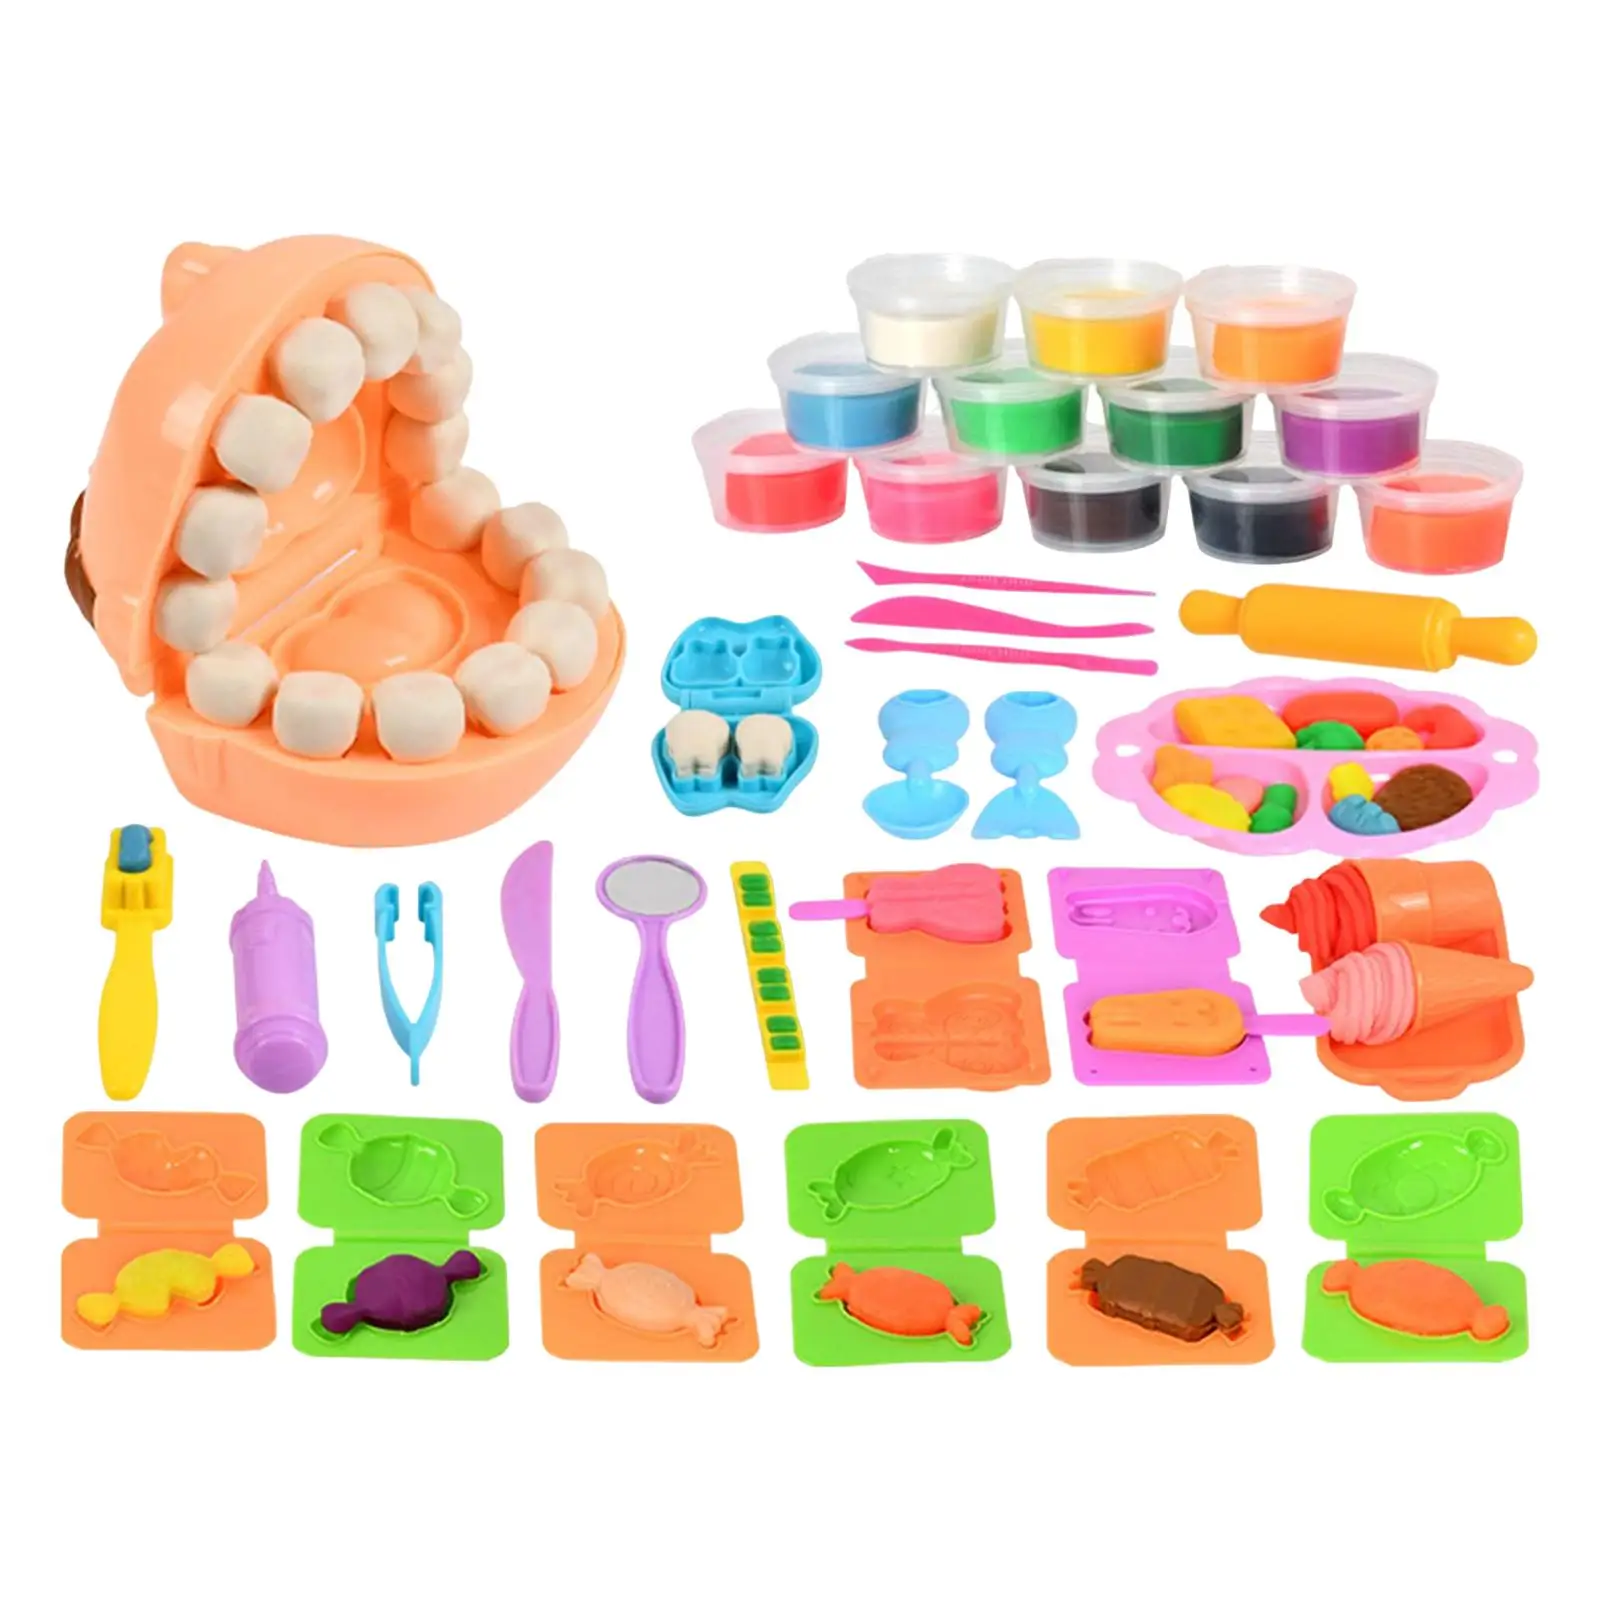 Modeling Clay Set Pretend Play 12 colors Crafts for Gift Children Girl